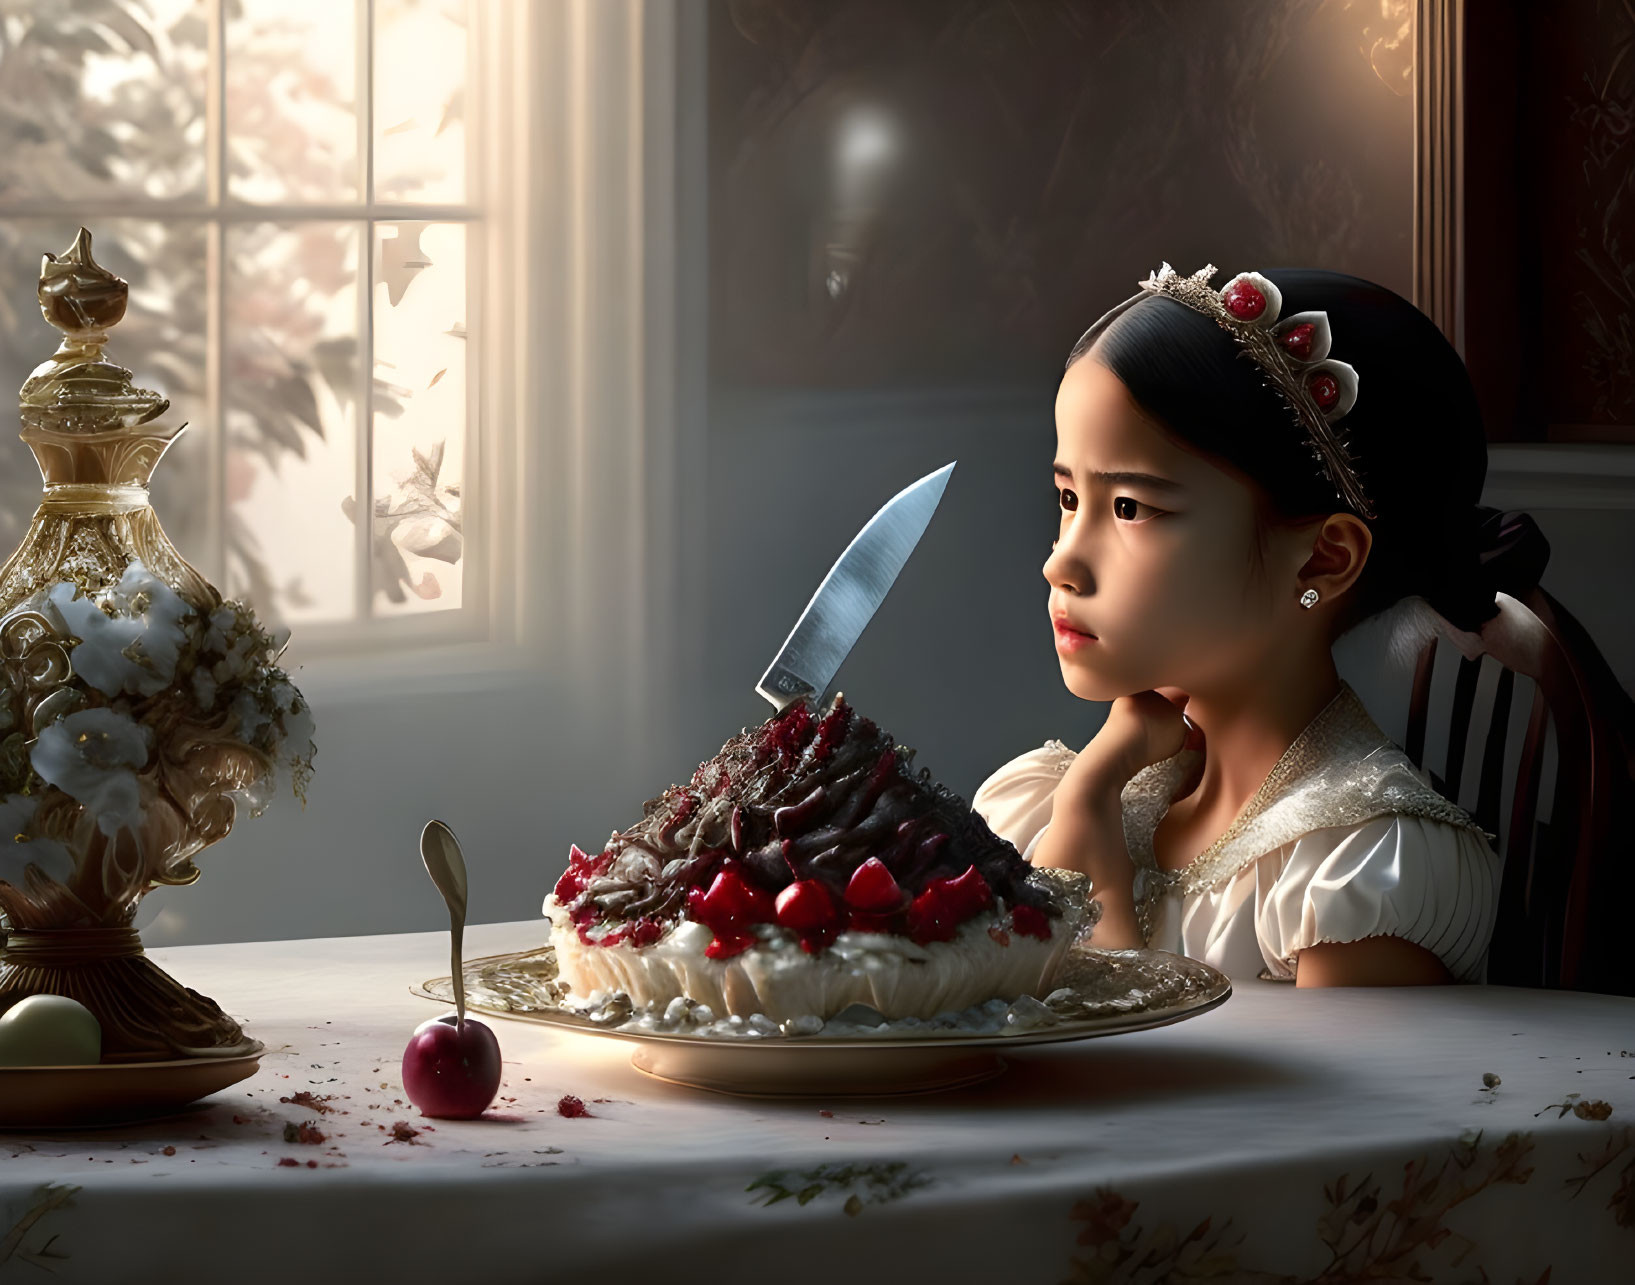 Young girl in princess costume admires cherry-topped cake with knife under sunlight.